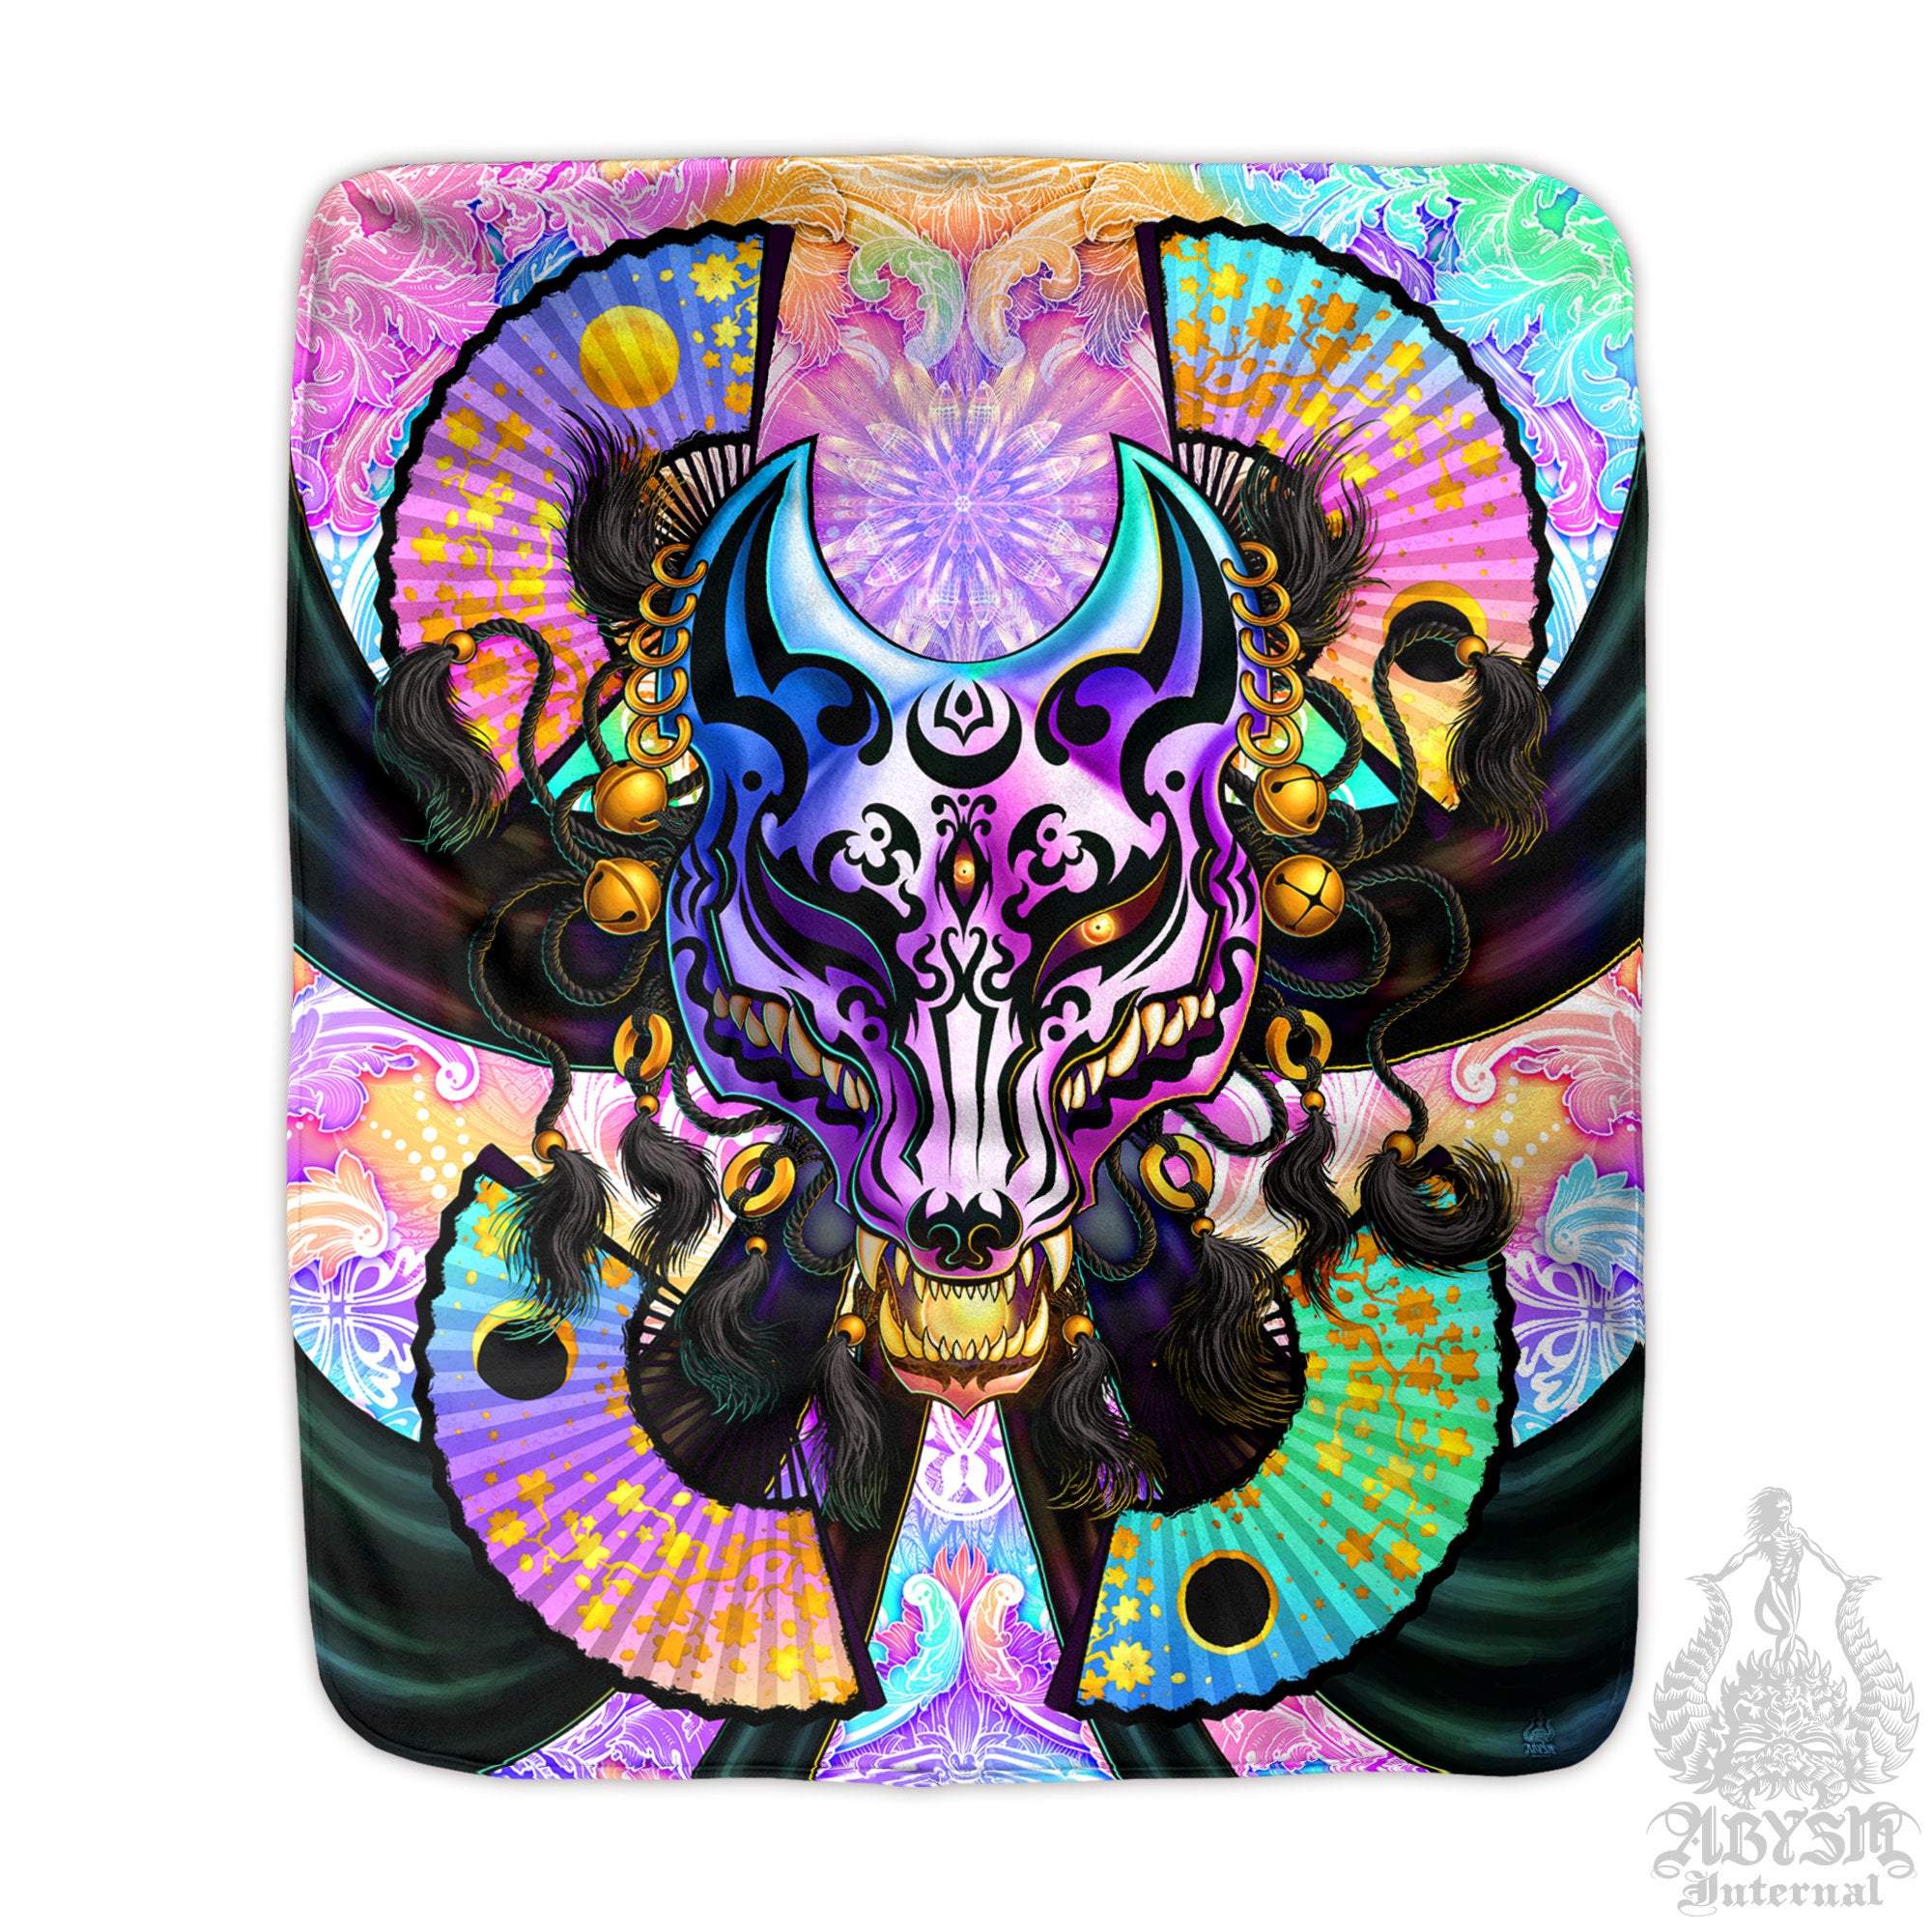 Kitsune Mask Throw Fleece Blanket, Okami, Japanese Fox, Anime and Manga Decor, Eclectic and Funky Gift - Holographic Pastel Punk - Abysm Internal